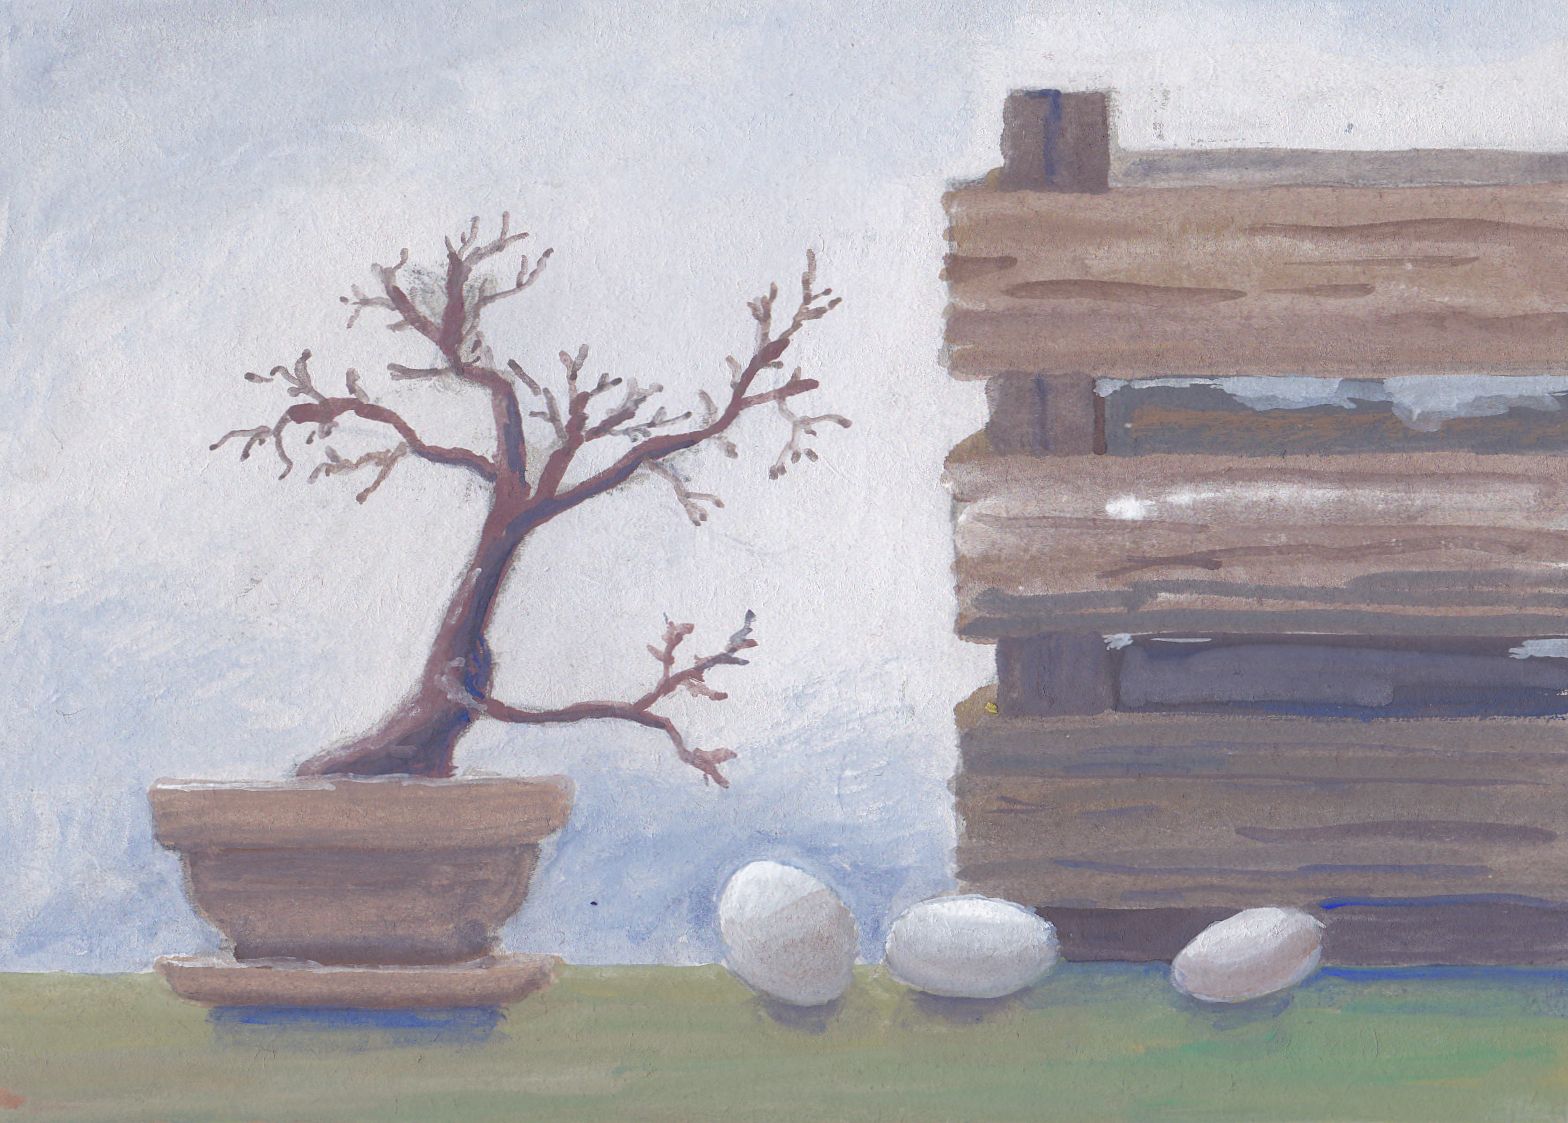 First inspiration or: The little guy and three eggs. Gouache auf Karton, 9 x 13 cm/ Gouache on cardboard, 3.5 x 5.1 in. by the way, the little guy is no longer with us :(